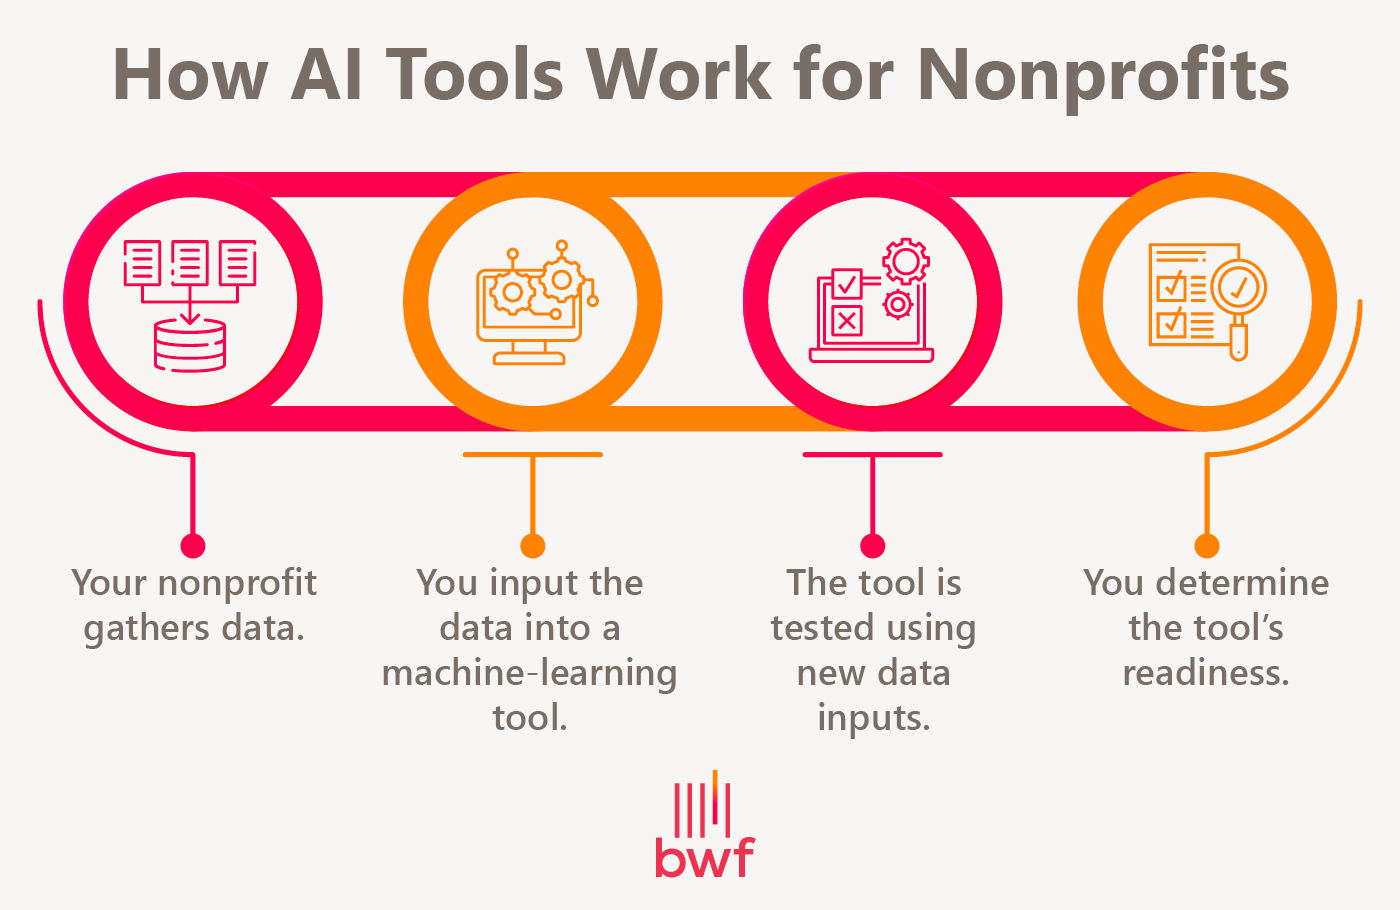 A graphic showing the steps of how AI tools for nonprofits work (also outlined in the text below).